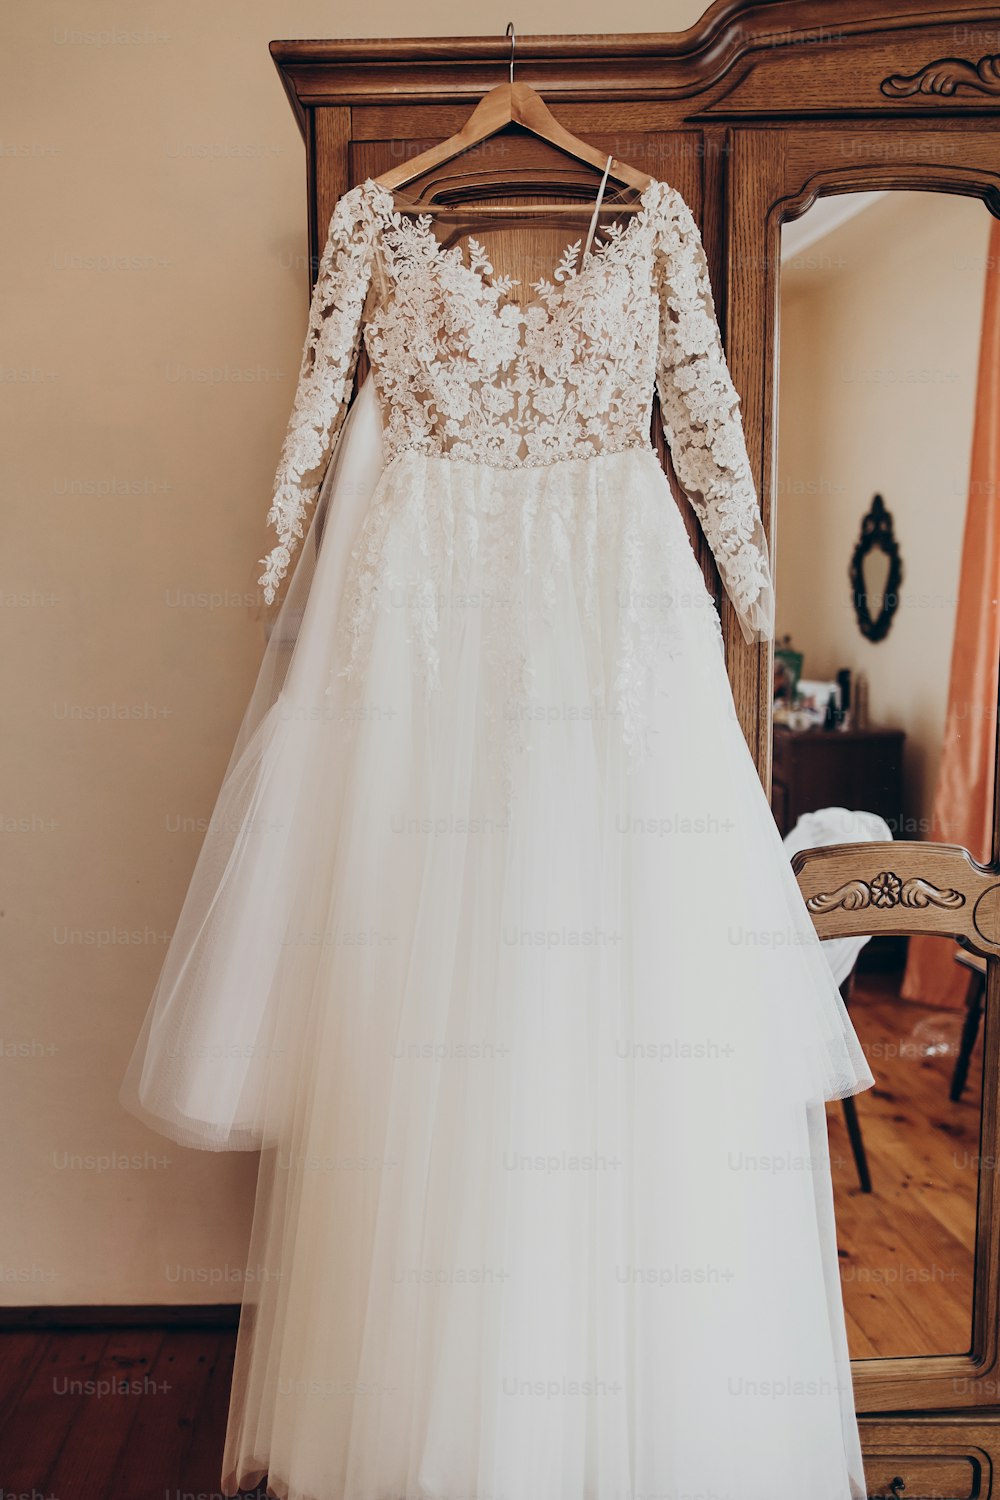 luxury wedding dress on hanger at wooden closet in rustic room. space for text. wedding morning preparation,getting ready. stylish gown